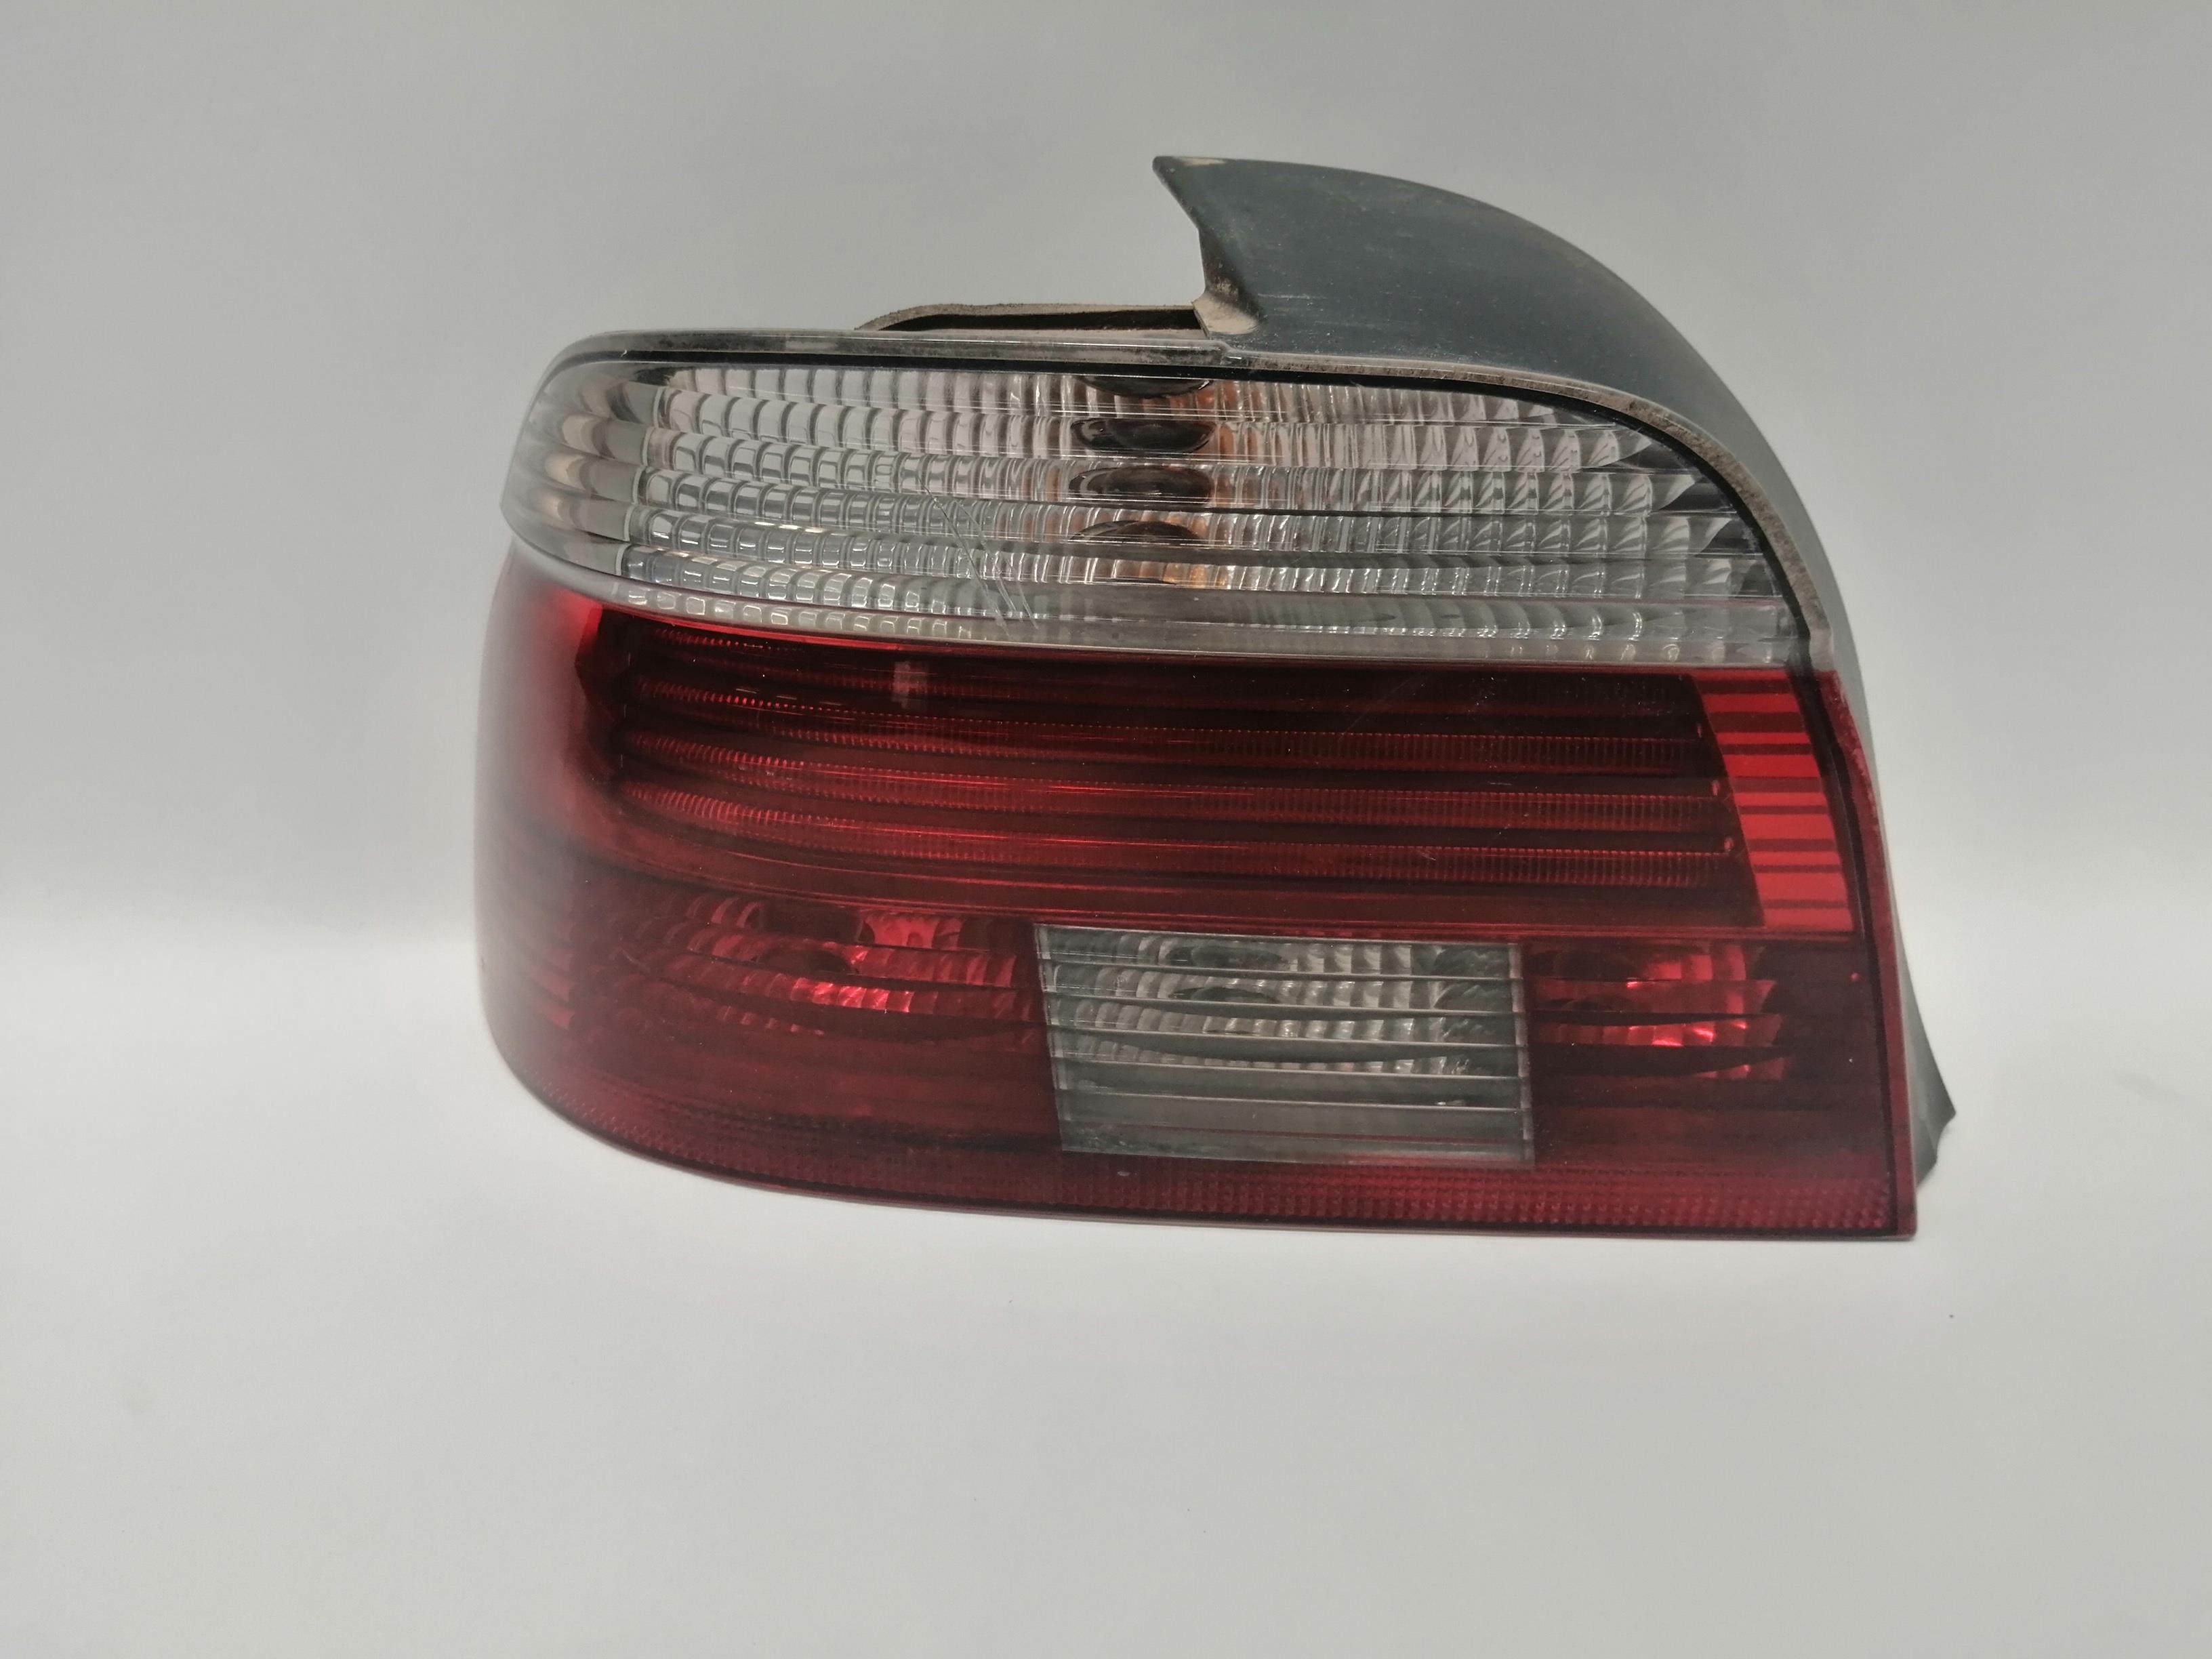 BMW 5 Series E39 (1995-2004) Rear Left Taillight 63216900209 25196892